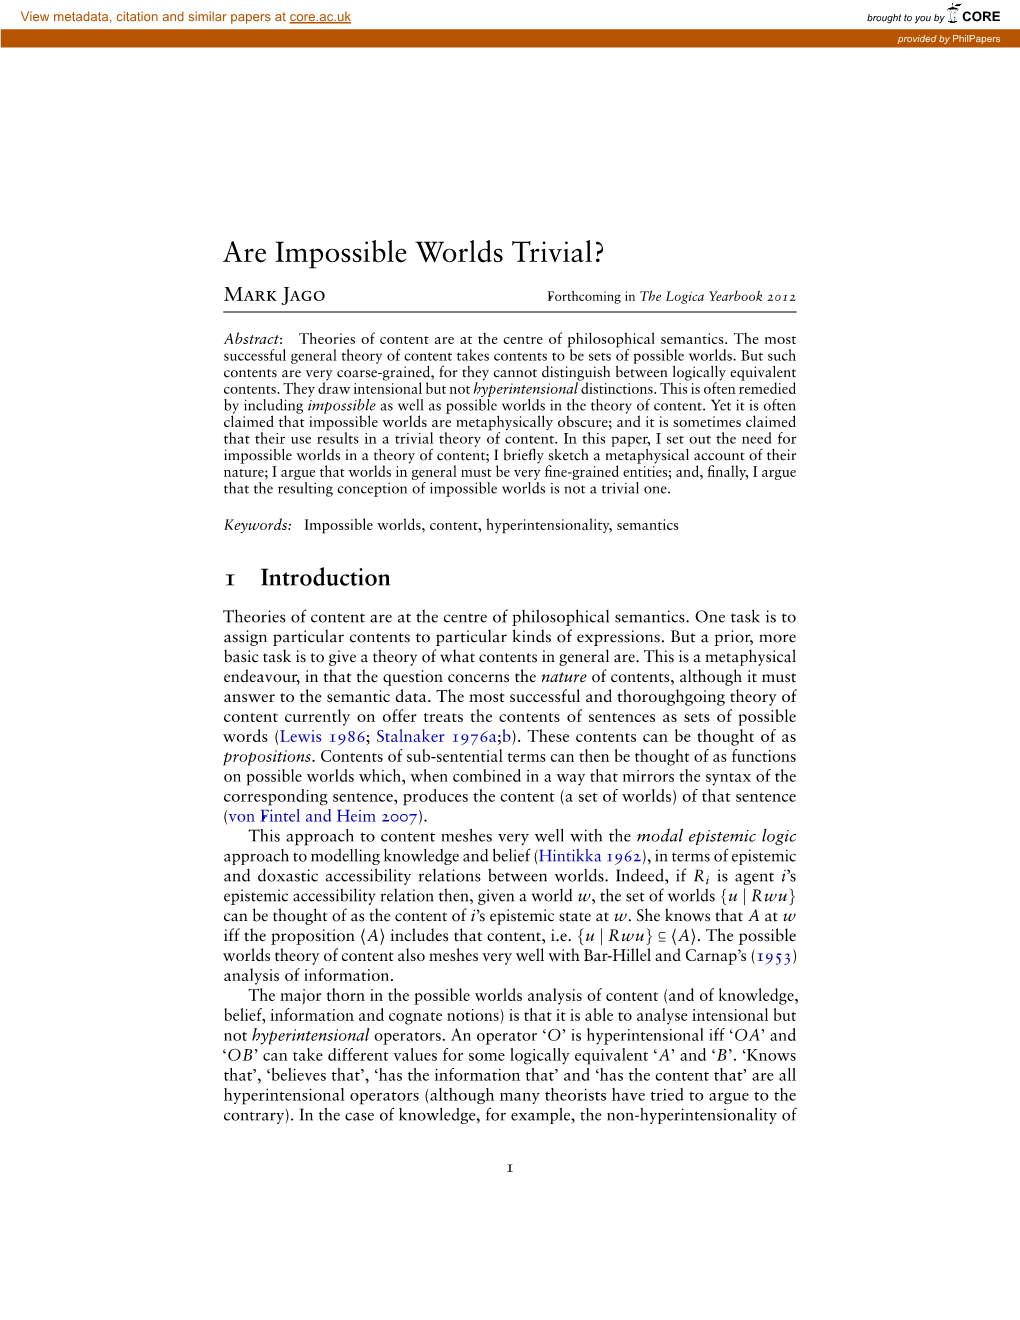 Are Impossible Worlds Trivial?